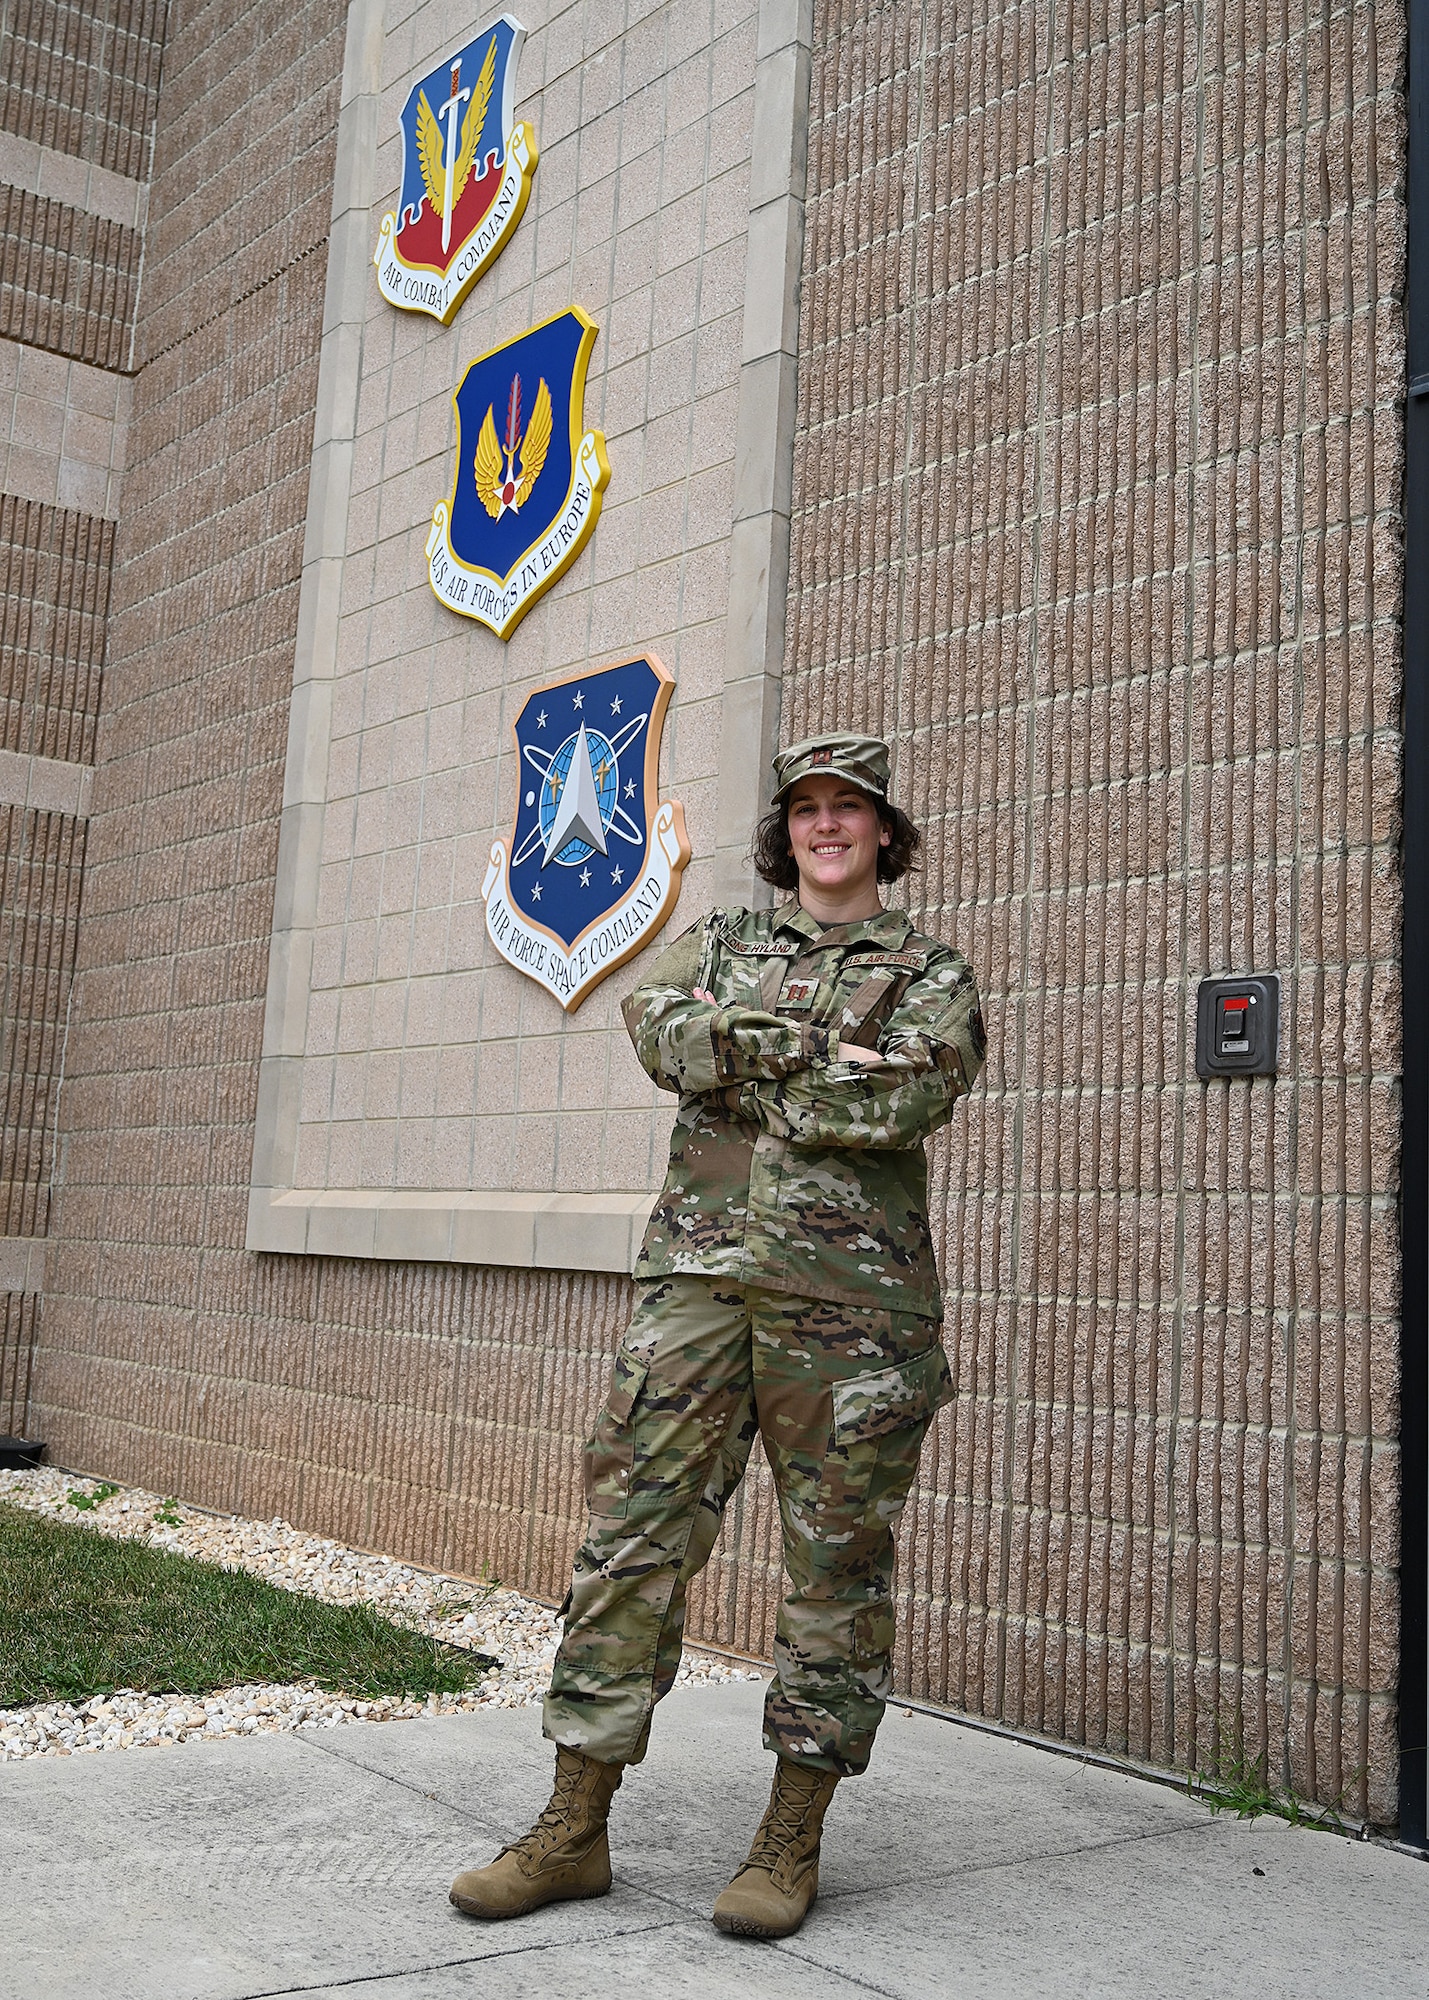 U.S. Air Force Capt. Danyelle Long-Hyland, a fusion analyst assigned to the 175th Cyberspace Operations Squadron, Maryland Air National Guard, poses for a photo October 6, 2019 at Martin State Airport, Middle River, Md. The 175th COS is assigned to a National Mission Team, which is a geographically aligned cyber team of operators and analysts that gather critical information to target enemies.